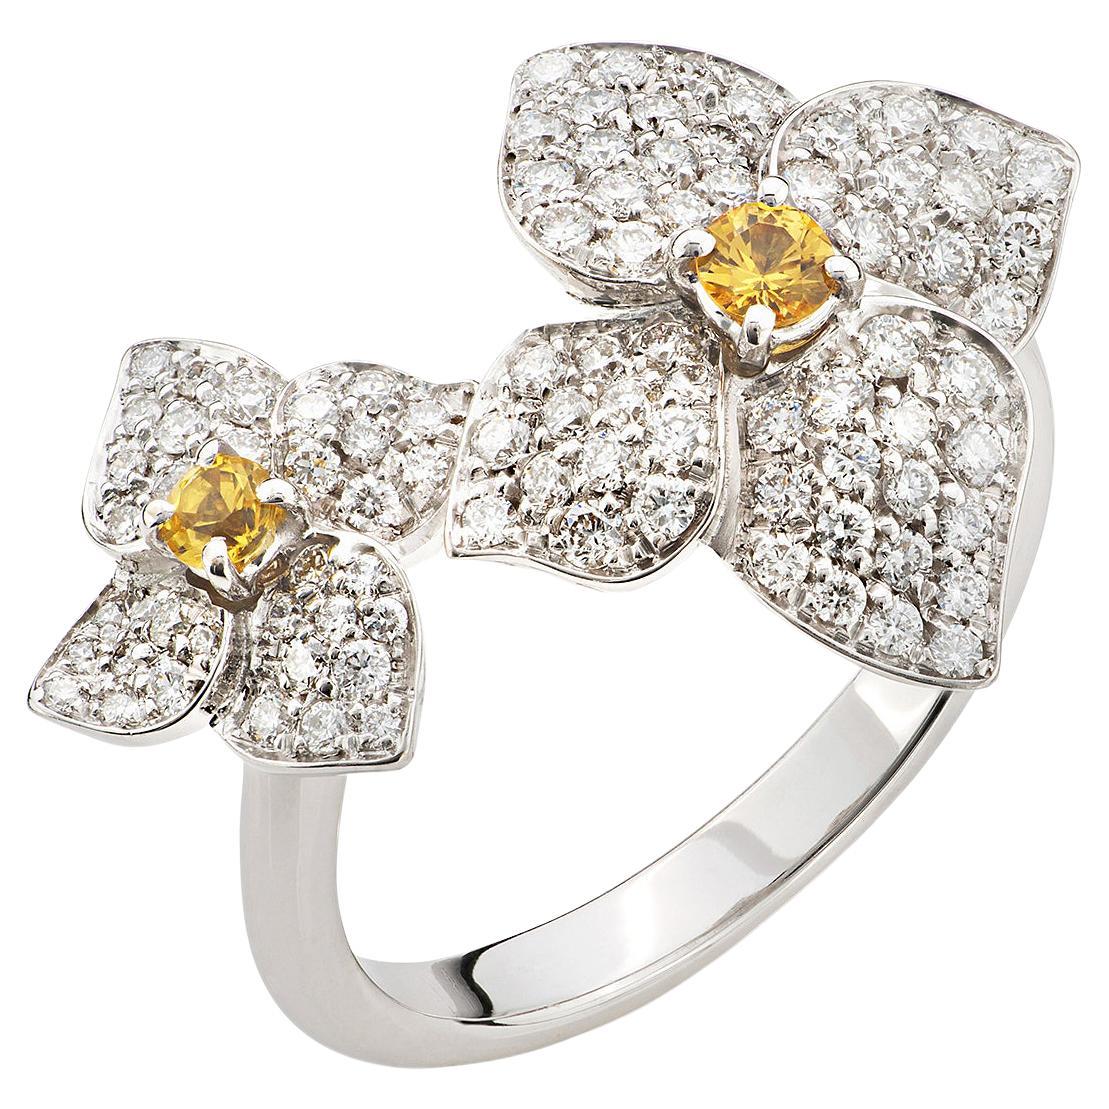 18 Carat White Gold, Diamonds and Yellow Sapphires, Flower Jewelry, Ortensia Ring For Sale